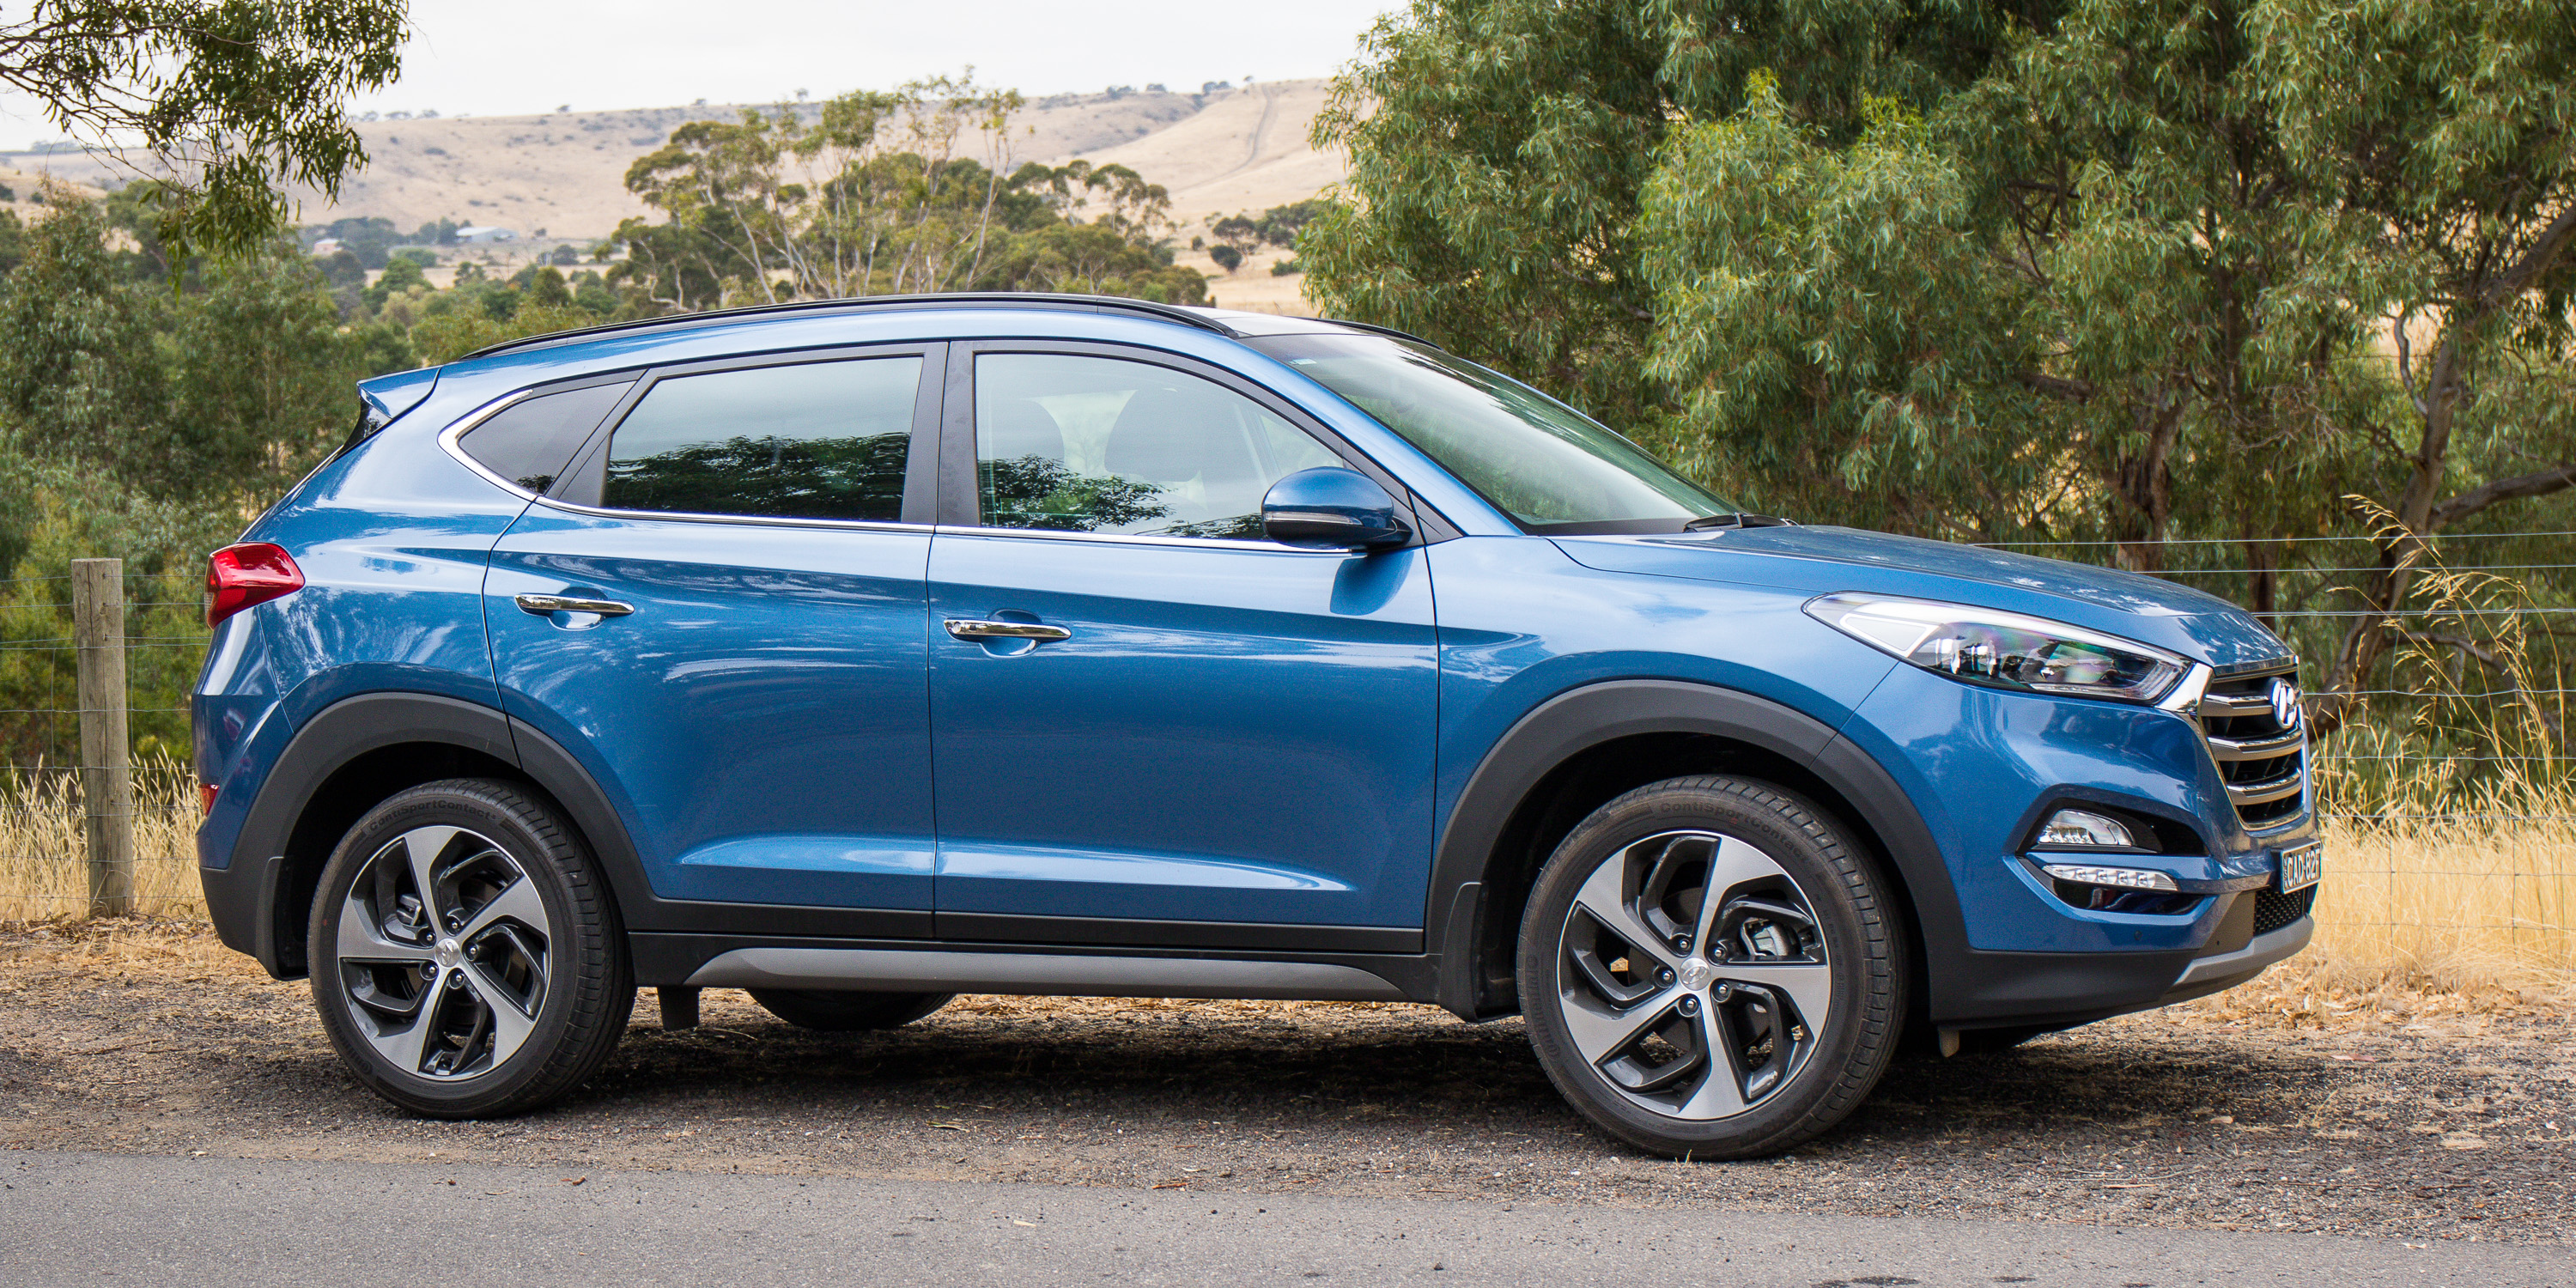 2018 Hyundai Tucson pricing and specs More power